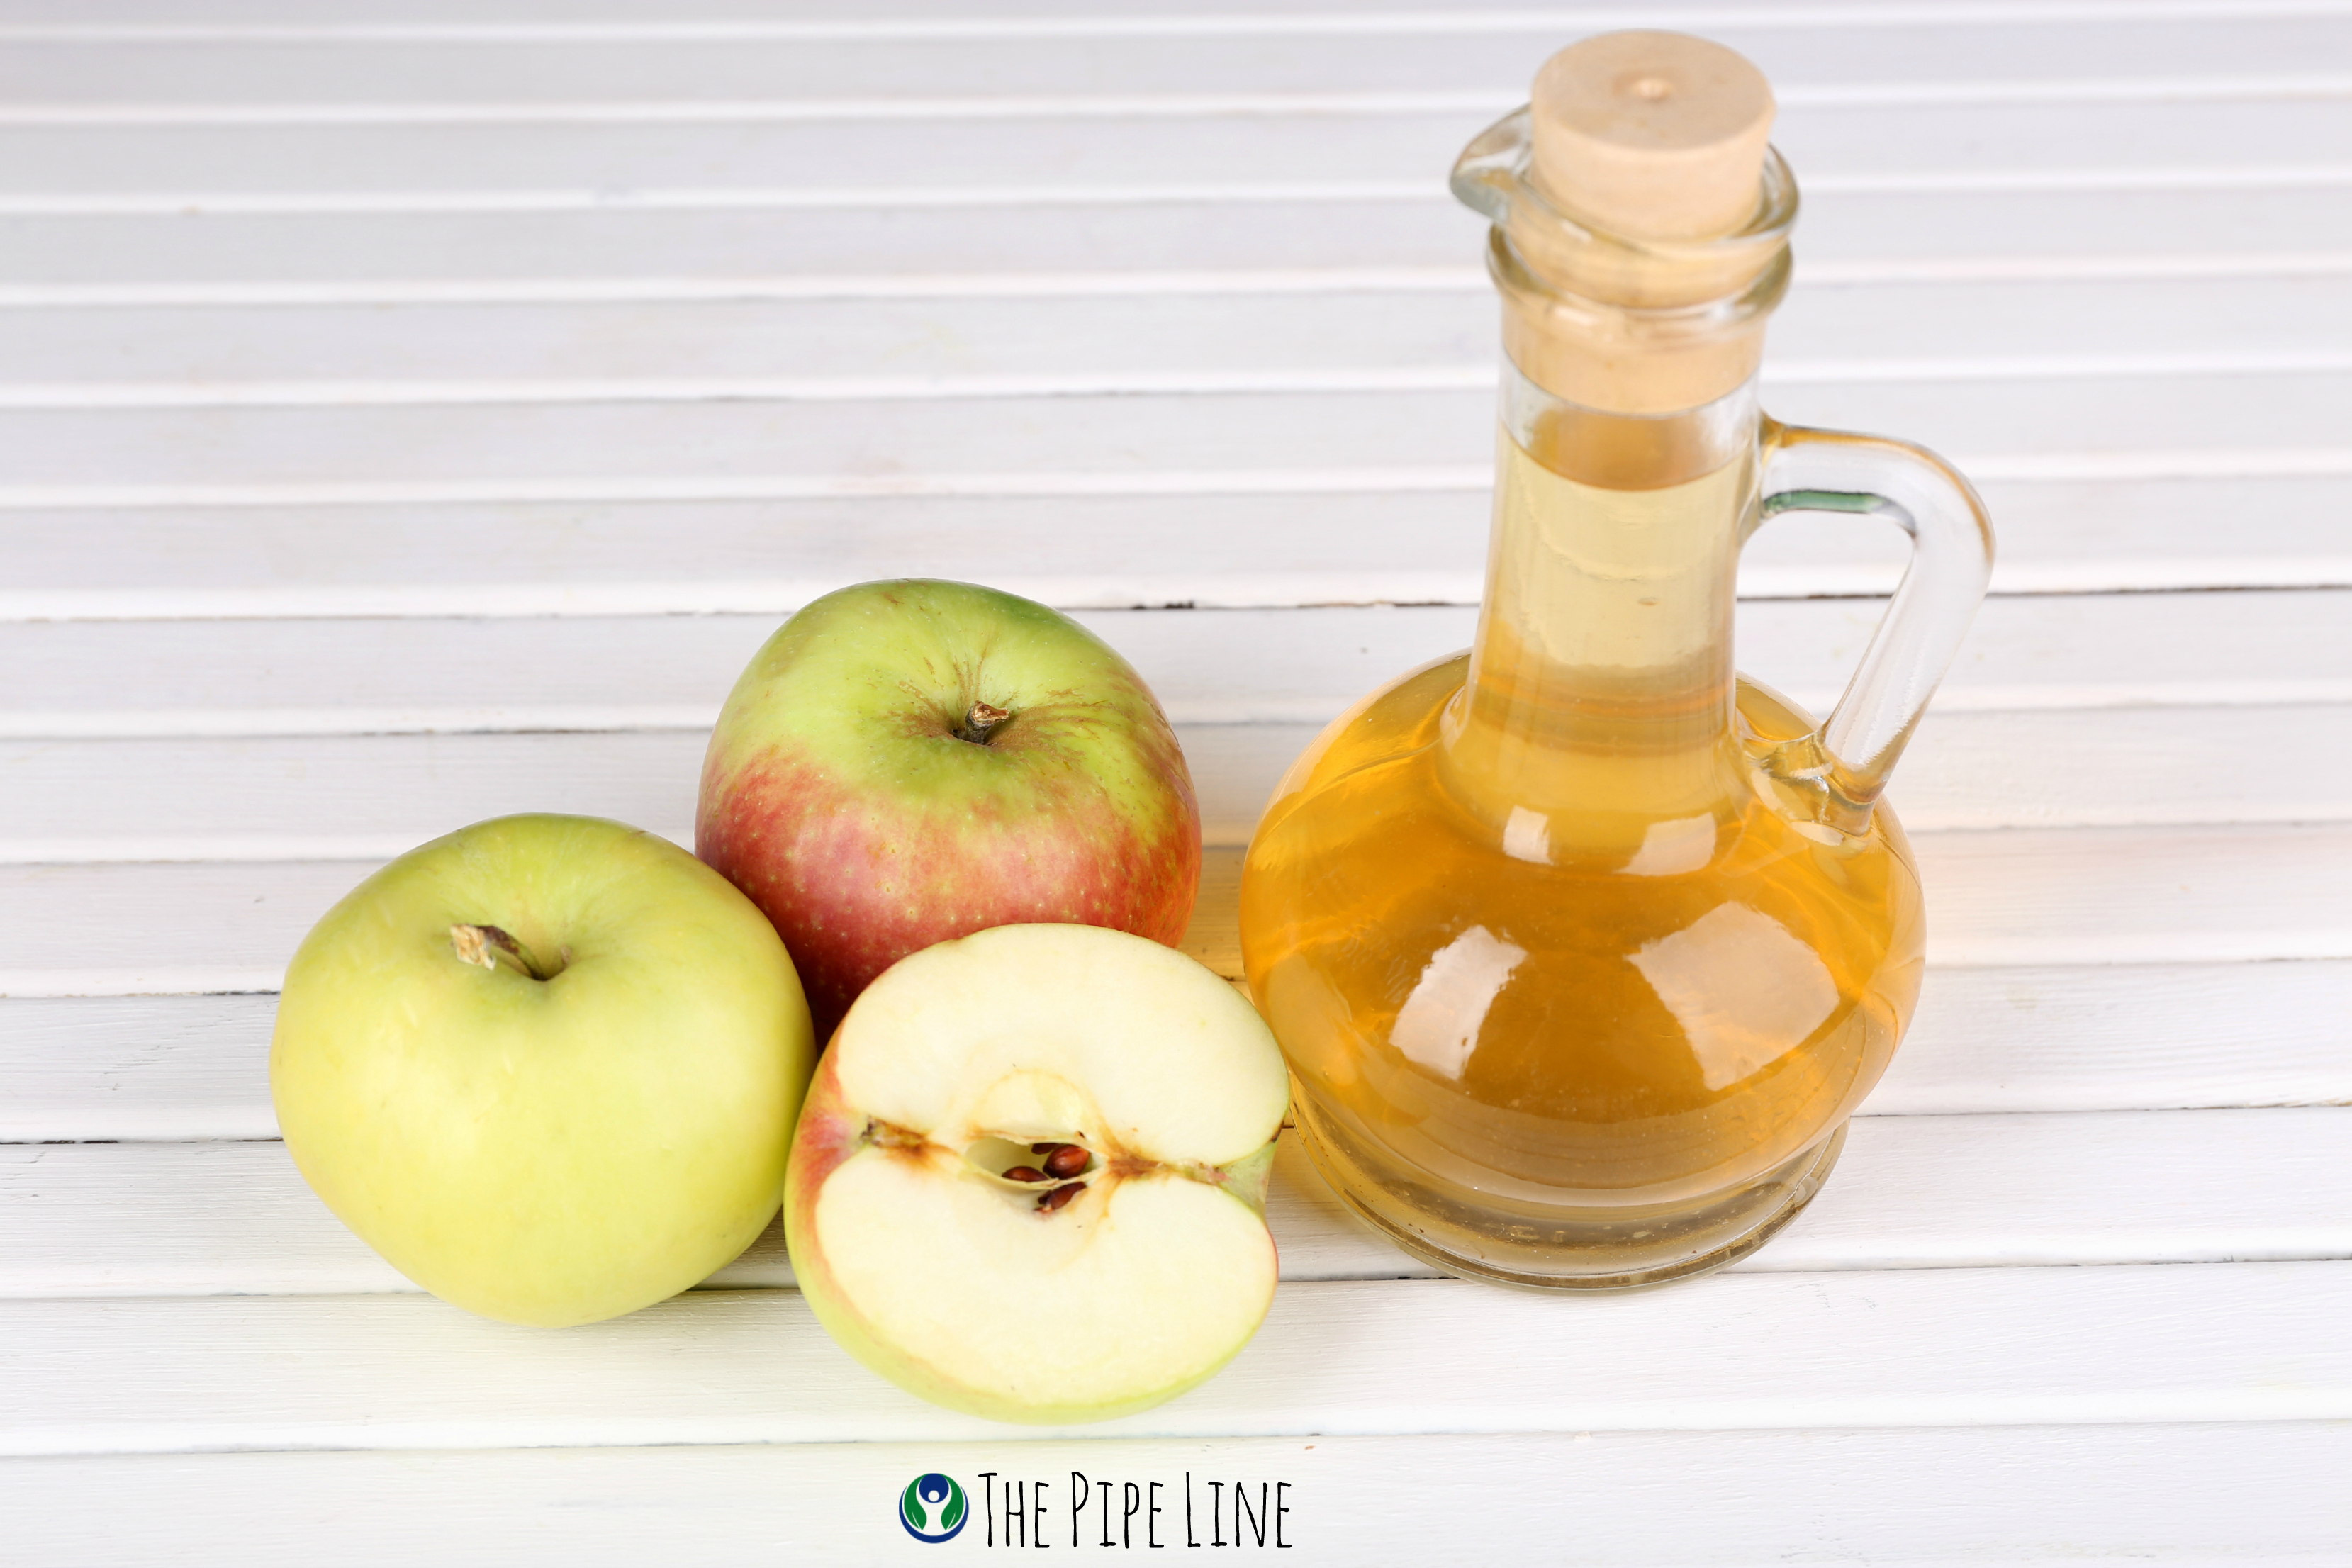 Piping Rock - The Pipe Line - 5 Ways to Get More Apple Cider Vinegar in Your Life